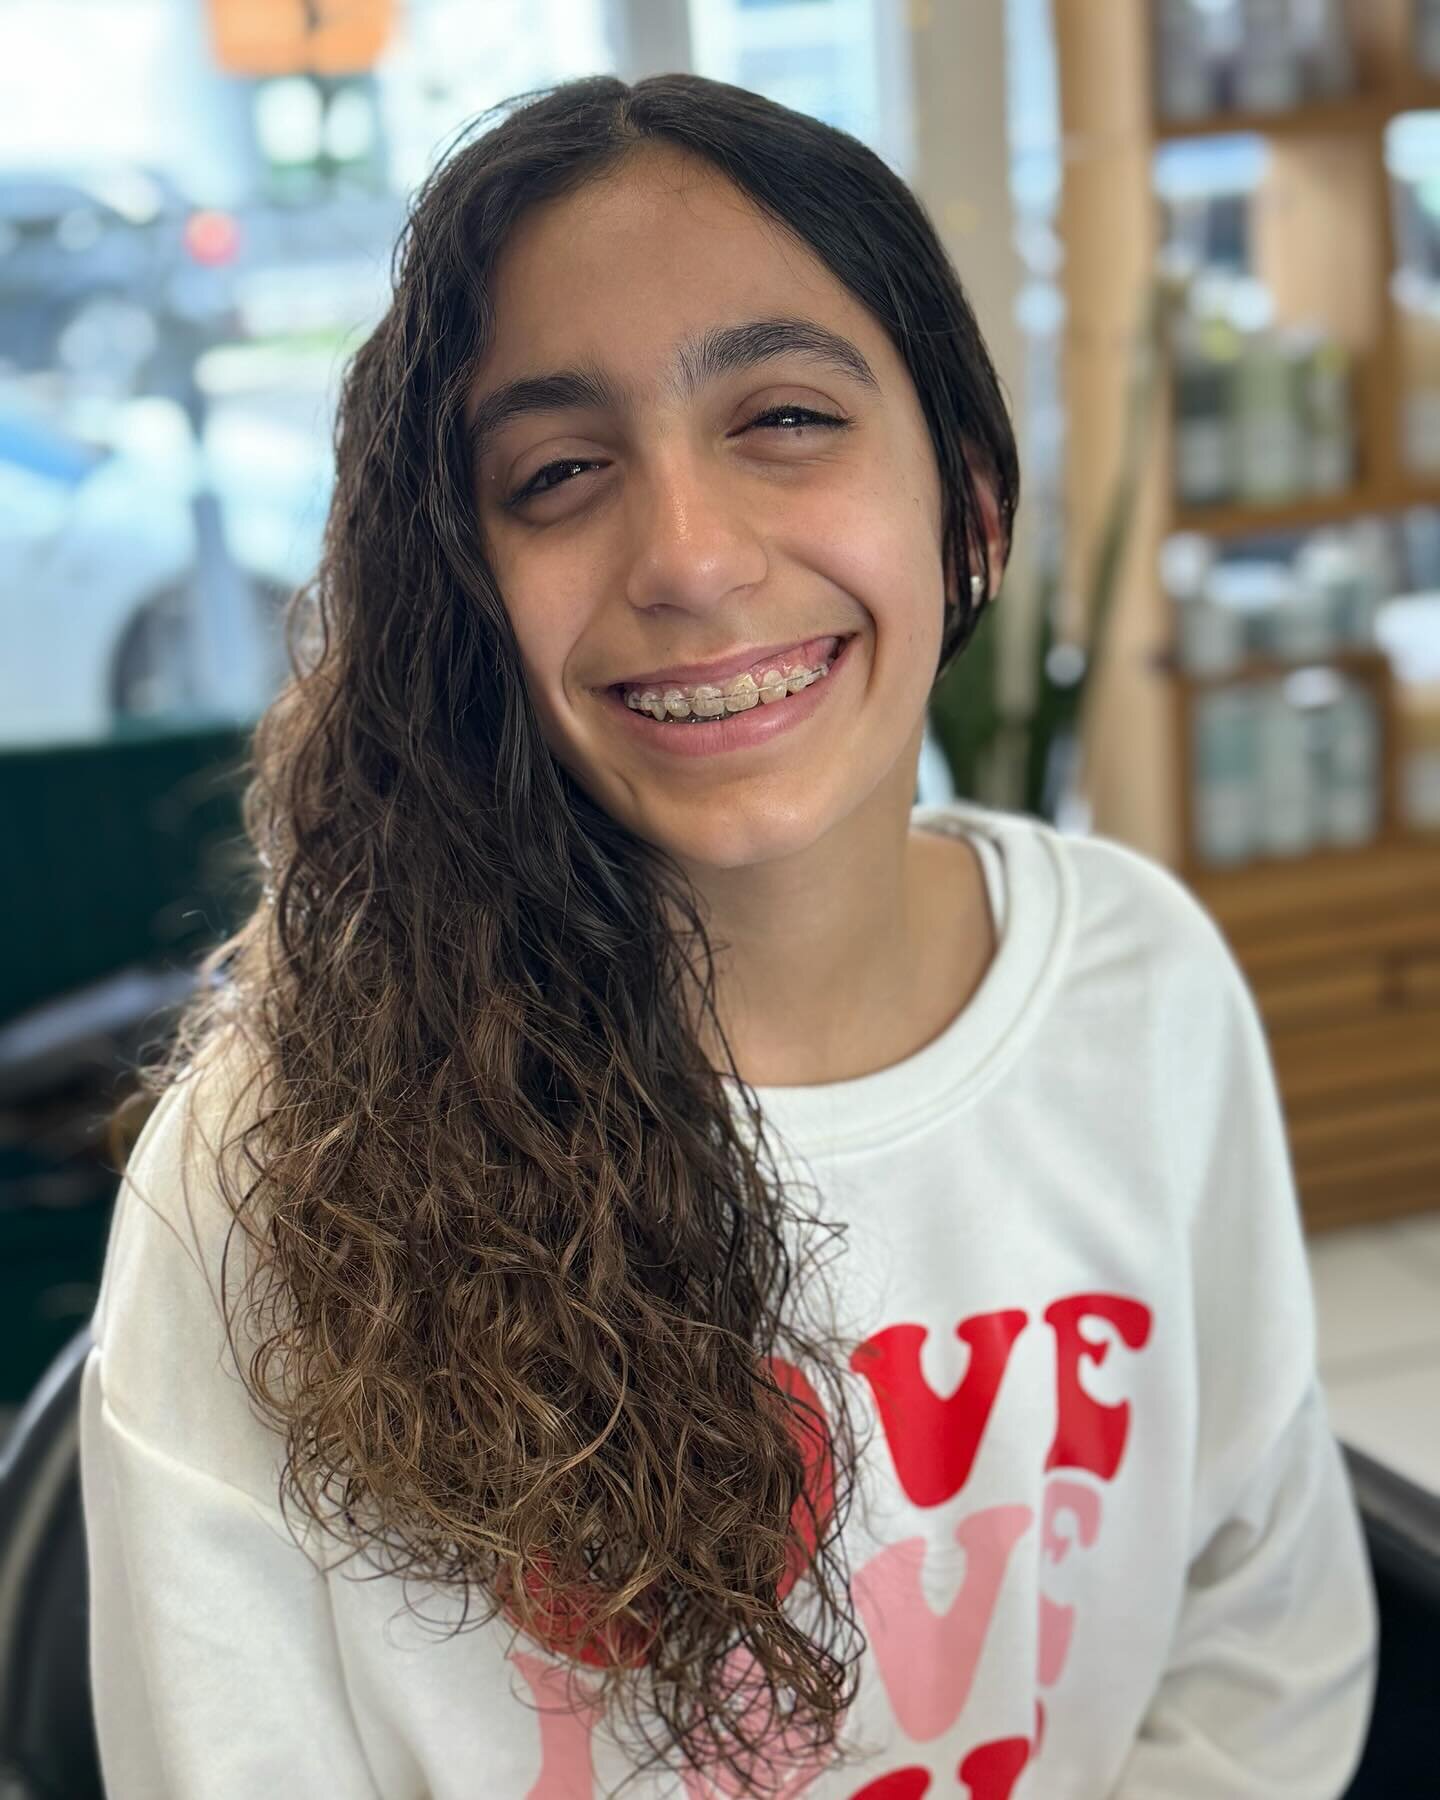 ✨Curl Revival➿💇&zwj;♀️ Watch Bella's curls come to life! ✨With a fresh haircut, moisture treatment, and a little diffuser magic! she is all smiles 😁  #curlyhair #curlyhaircare #curlyhairinspiration #healthycurls #southbaysalon #davines #olaplex #sa